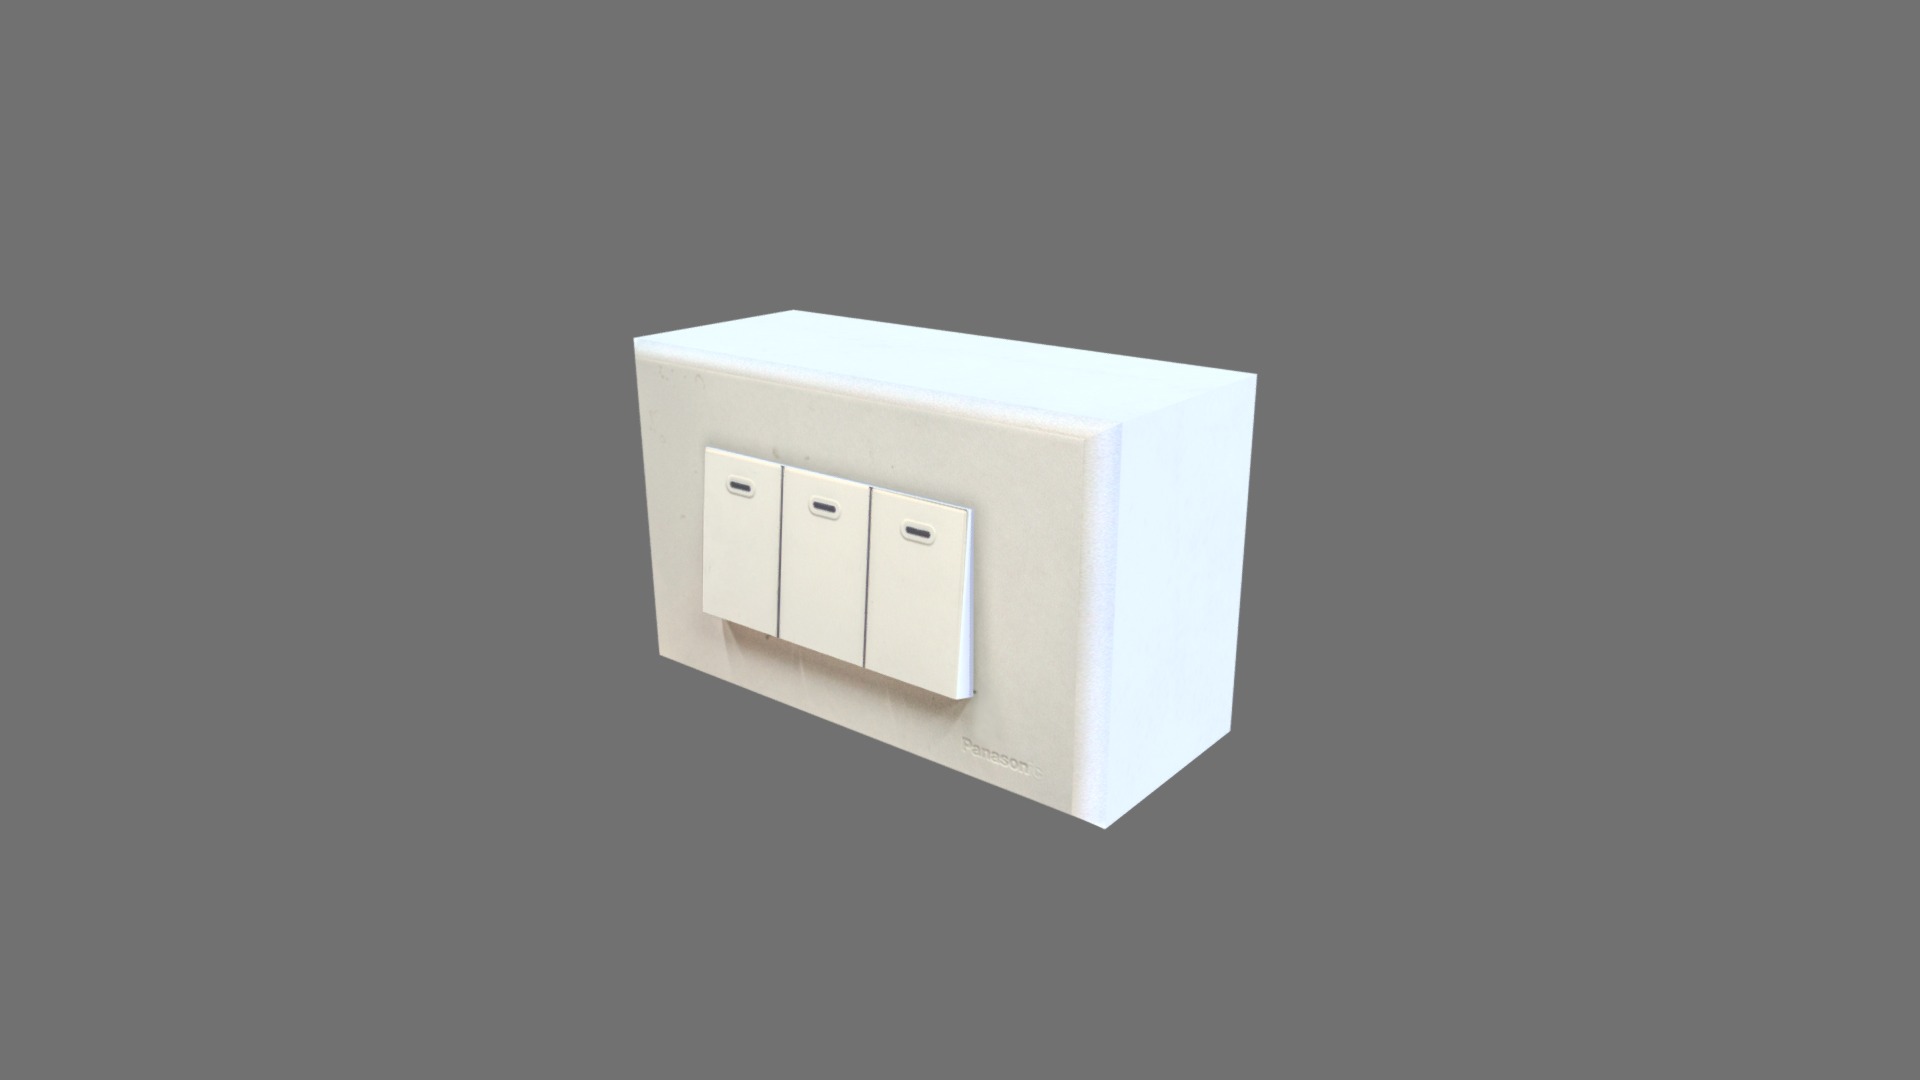 3D model Electric switch 01 - This is a 3D model of the Electric switch 01. The 3D model is about a white box with a black background.